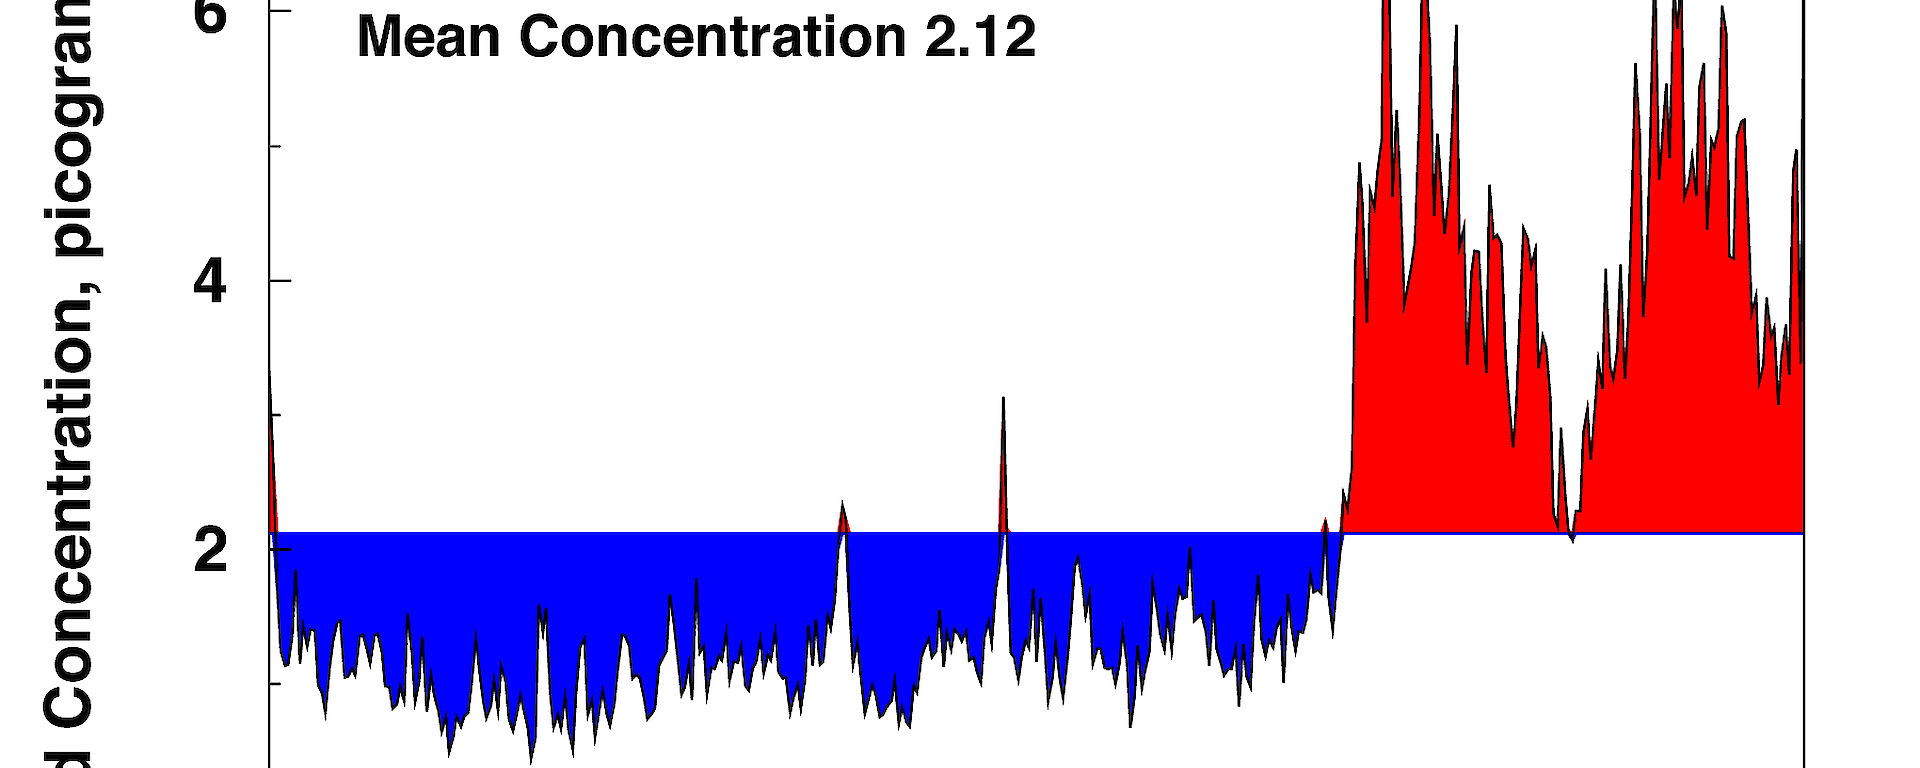 Grapic showing the concentration of lead across 16 ice cores since the 1600s.